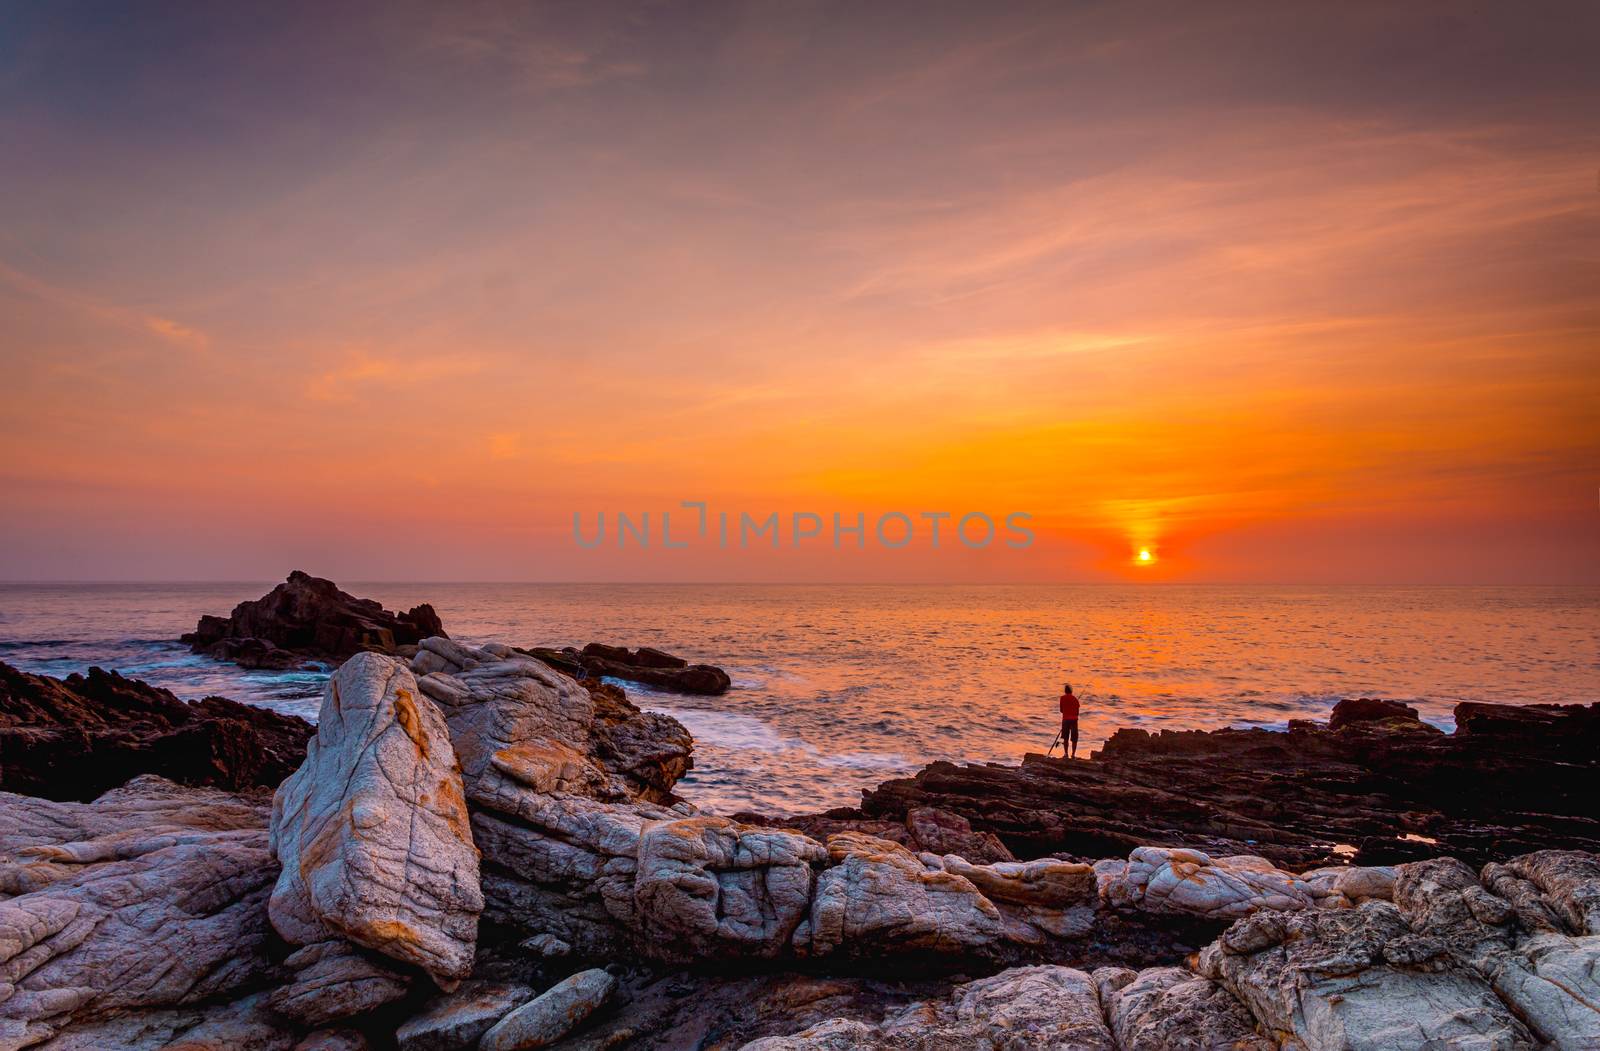 Brilliant vivid orange sunrise over the ocean with foreground rocks in various textures and stained with orange ochres.  A fisherman in the distant rocks hopes for a morning catch